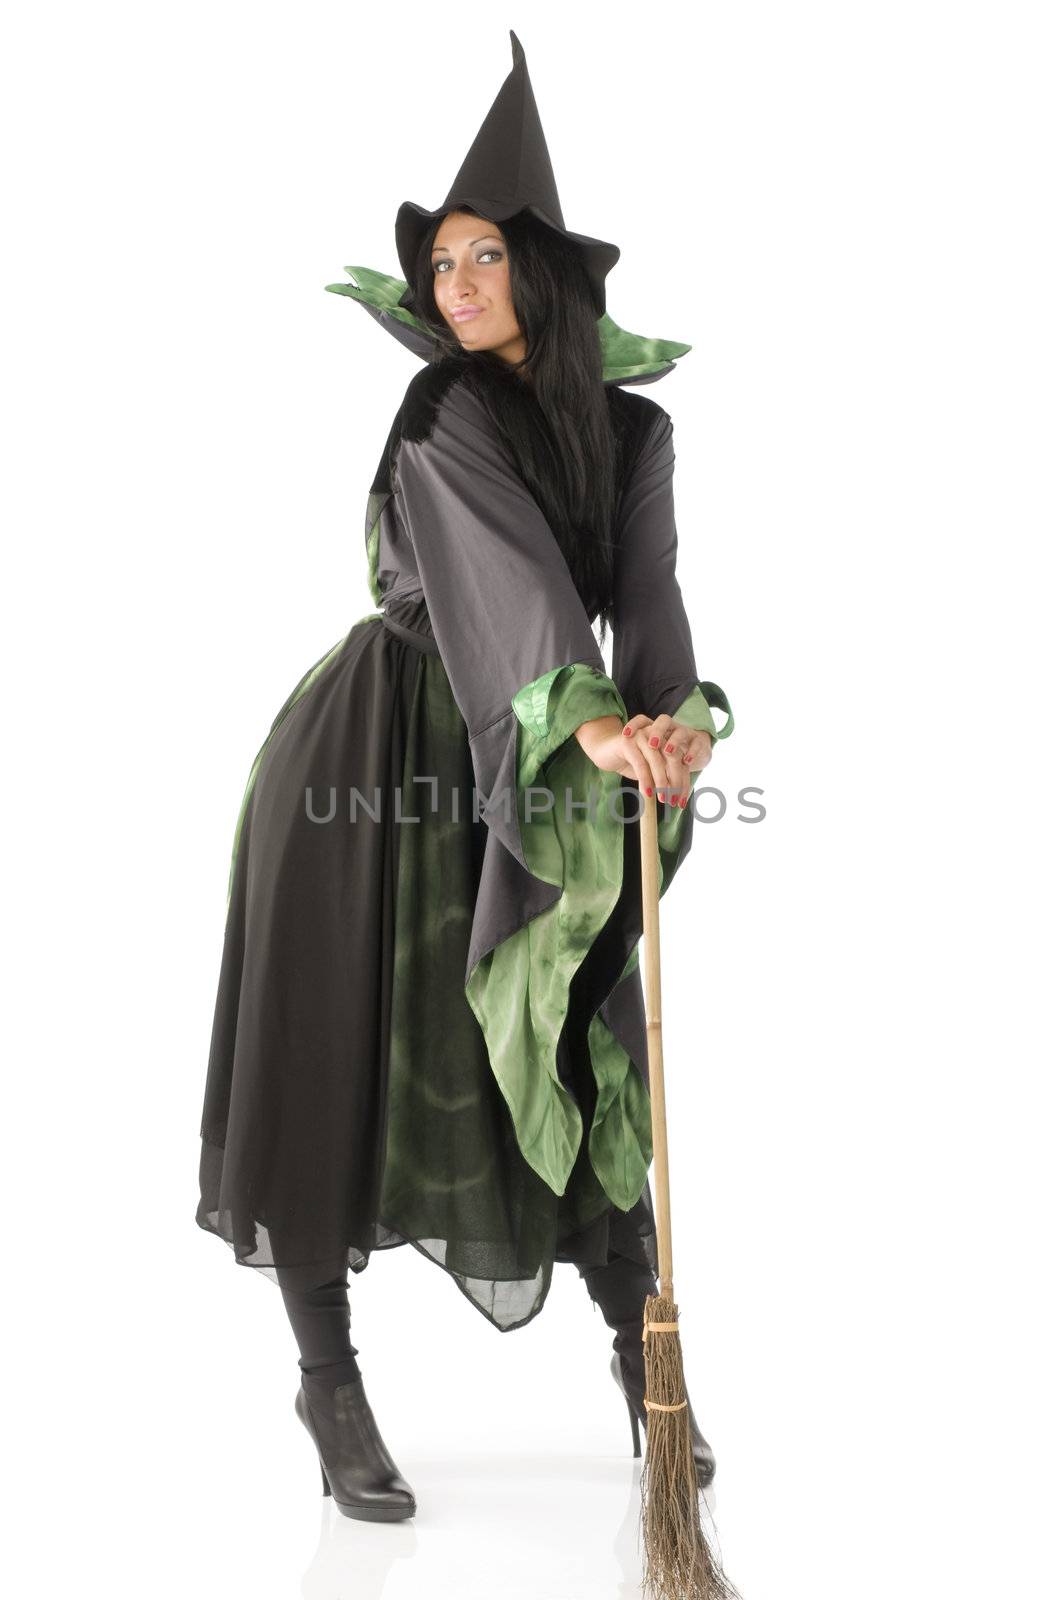 witch in green and black witch dress with broom and hat posing